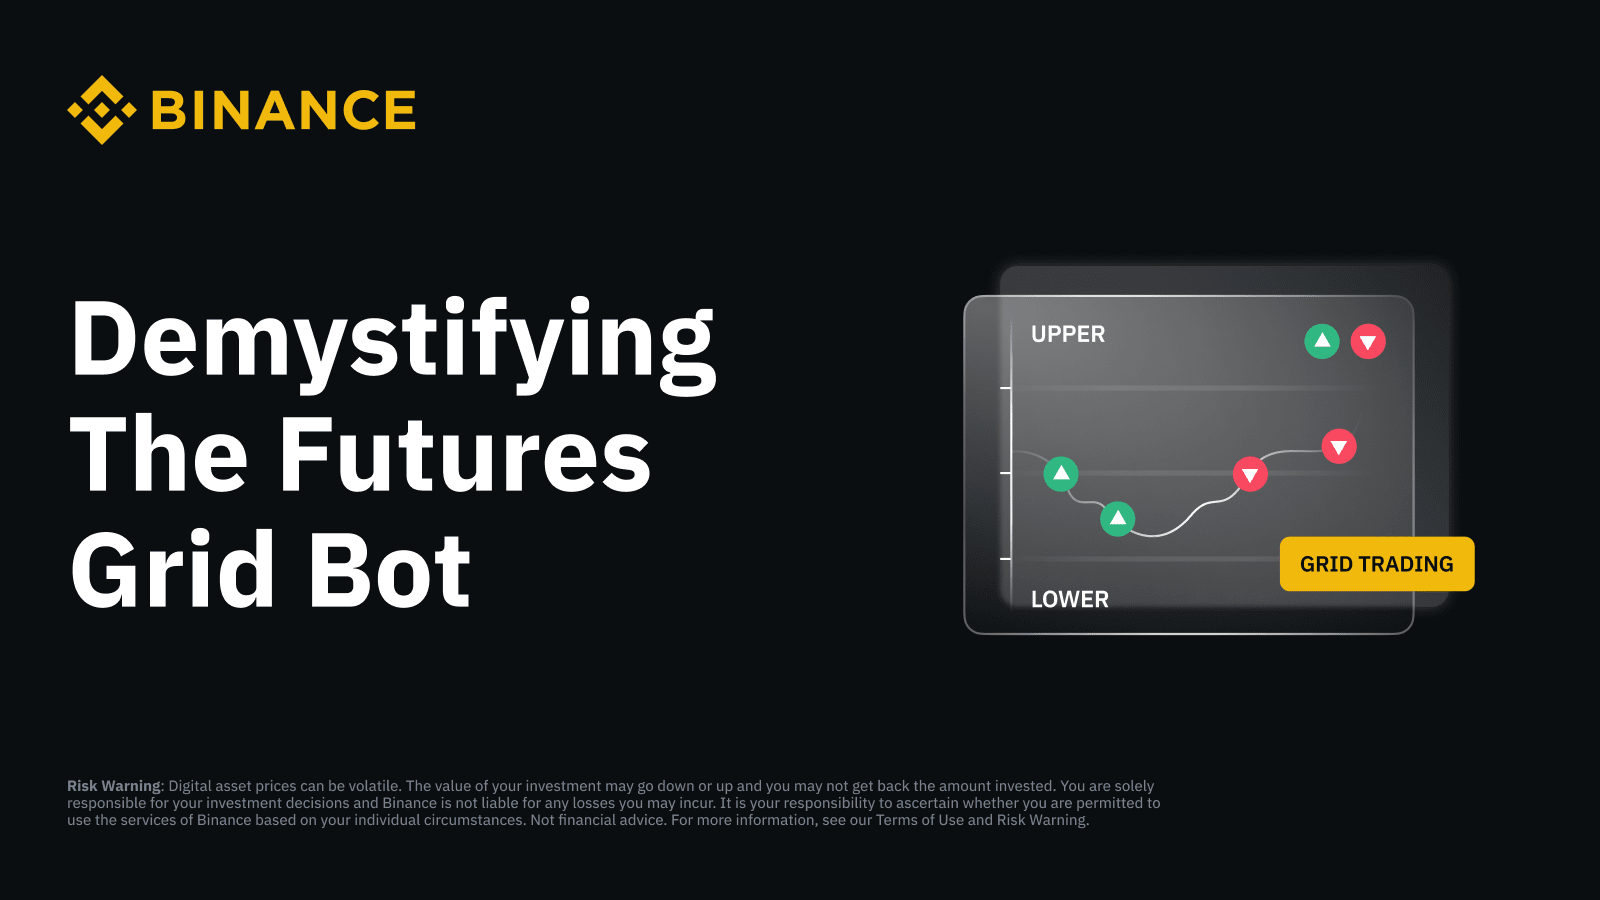 How to Run a Trading Bot on Binance